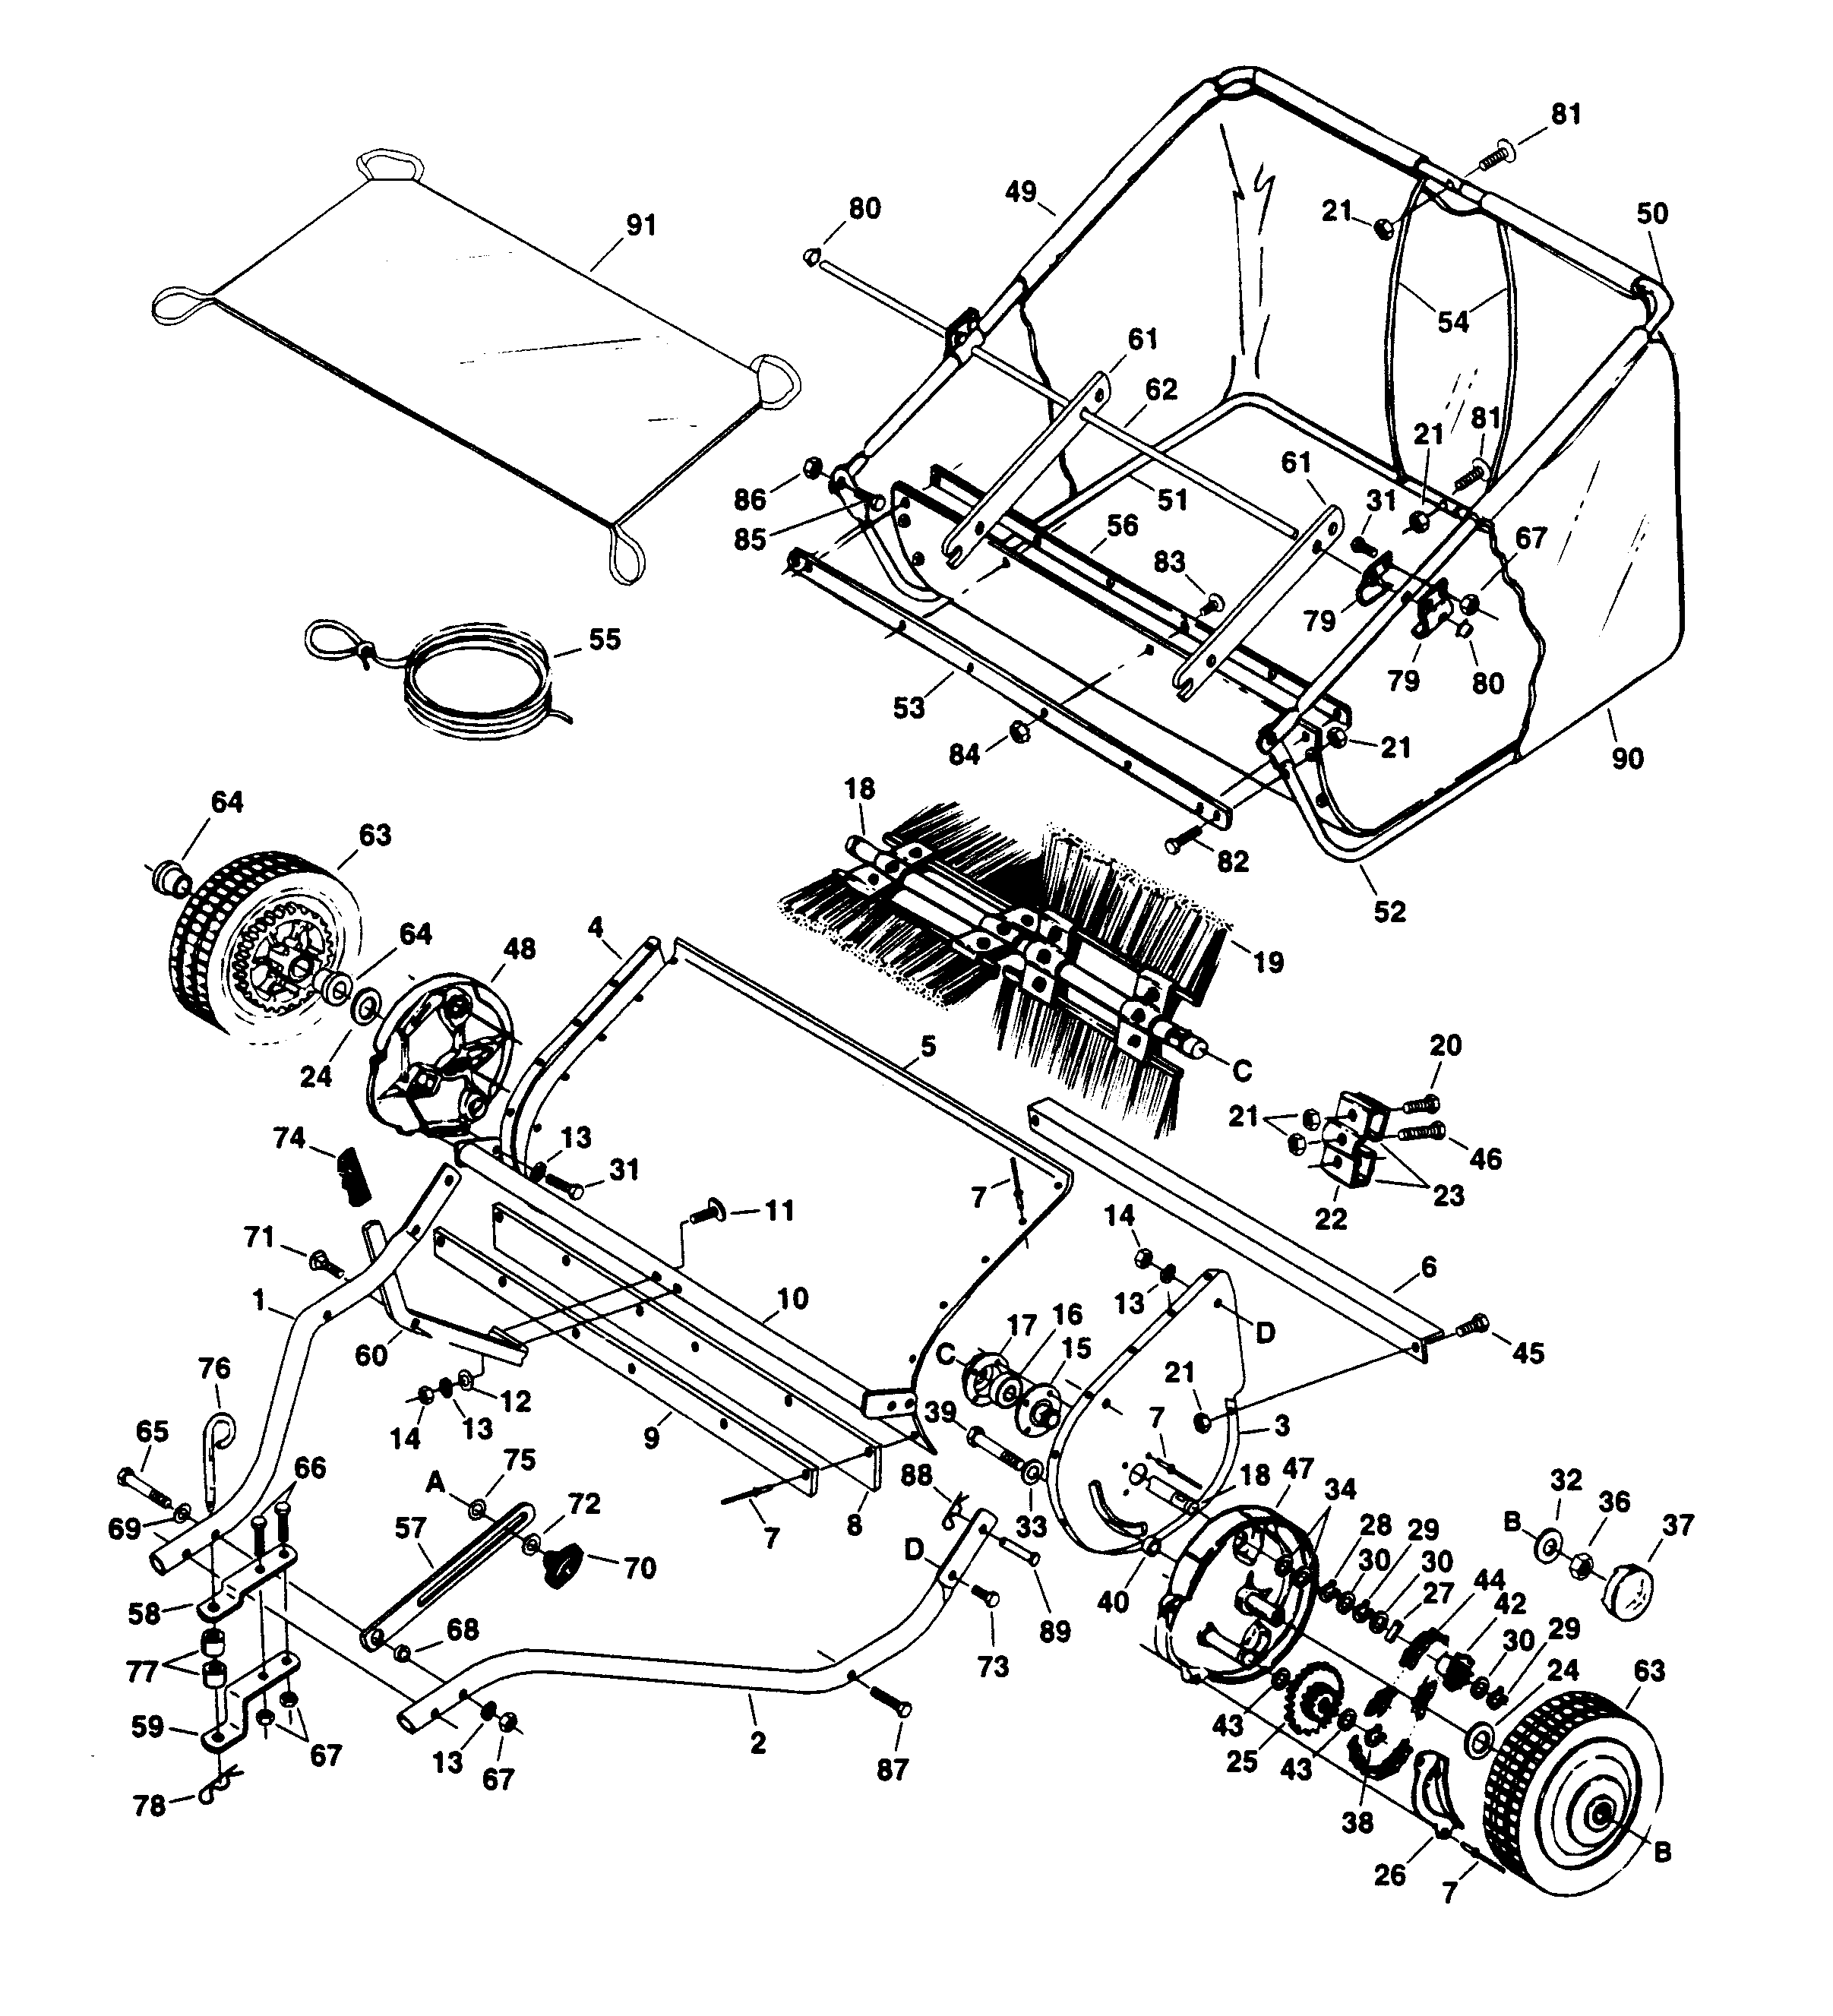 Chassis and appendix 531007409, 531007411, 531002808, 531002809, 531007413, 531007415, 722787003, 531007617, 531007609, 531007418, 531002815, 531002816, 735116405, 873220500, 506620201, 531002817, 506620401, 531007615, 531007420, 729237051, 531007629, 506620601, 506620701, 531002741, 506621701, 506621801, 506621901, 506632301, 506622401, 577731701, 596030501, 734117341, 734117201, 506624701, 506622901, 506623001, 506623101, 874610652, 506626601, 531002799, 506623501, 506623601, 531002745, 531002821, 531007626, 531002744, 531002743, 531007603, 531007602, 531007604, 531007605, 531007614, 506624401, 531002734, 531007609, 506620901, 531002828, 531002772, 506621201, 531002831, 531007423, 531007424, 531002746, 506625401, 531002834, 531002835, 531007616, 531002836, 734115201, 506626001, 595901601, 734116401, 531007426, 506626401, 531002839, 506625601, 506626501, 721680251, 506626701, 531002840, 725237251, 725237471, 725232951, 732211401, 506625301, 596322601, 531002838, 531002843, 531004638, 531007606, 531002856, 531007450